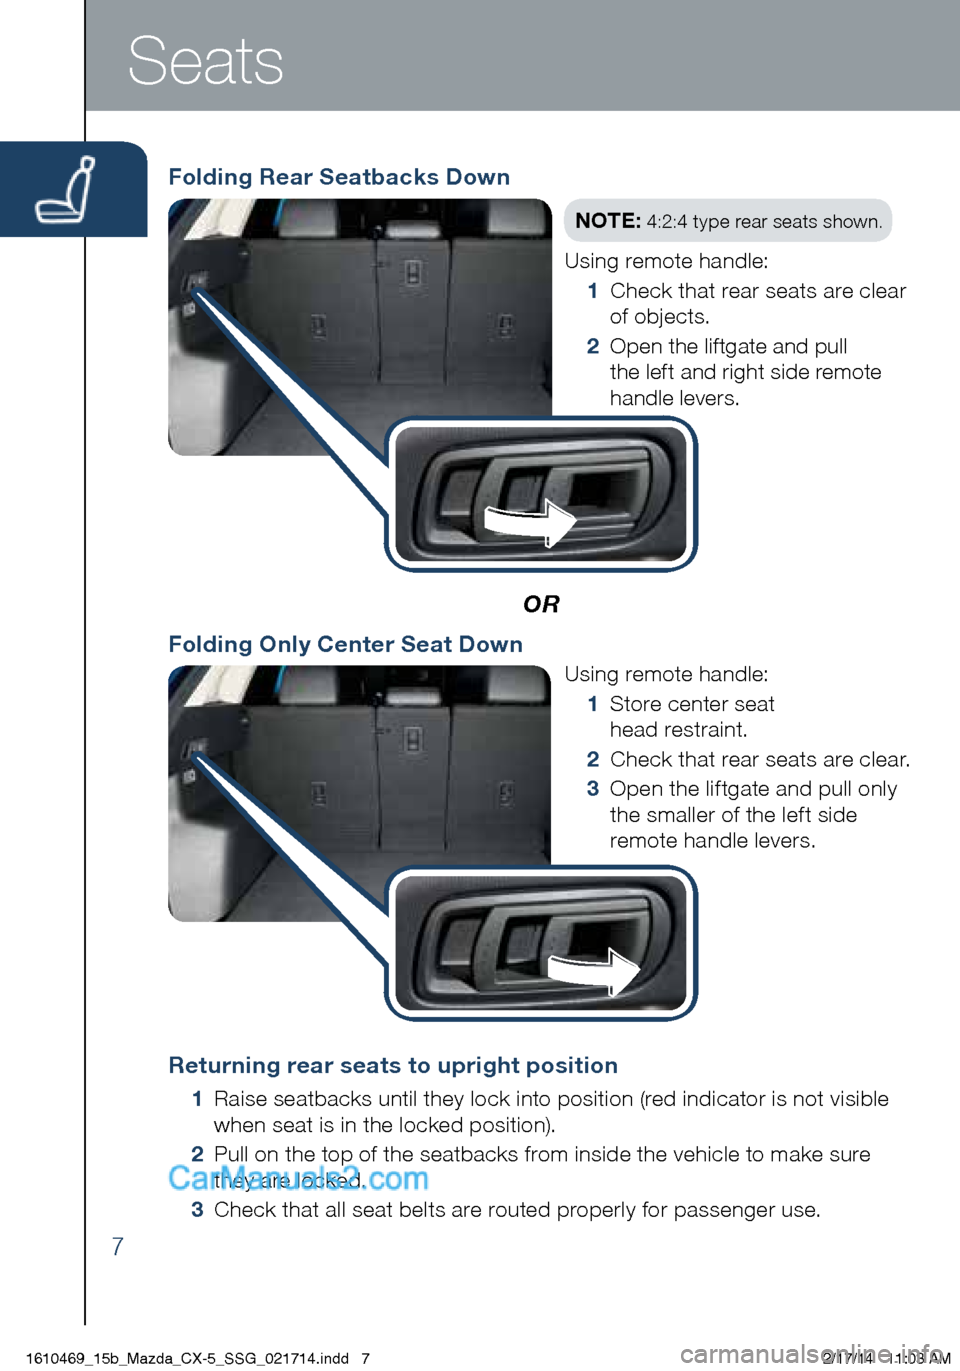 MAZDA MODEL CX-5 2015  Smart Start Guide (in English) Folding Rear Seatbacks Down
OR
Returning rear seats to upright position
 1 Raise seatbacks until they lock into position (red indicator is not visible   
    when seat is in the locked position).
  2 